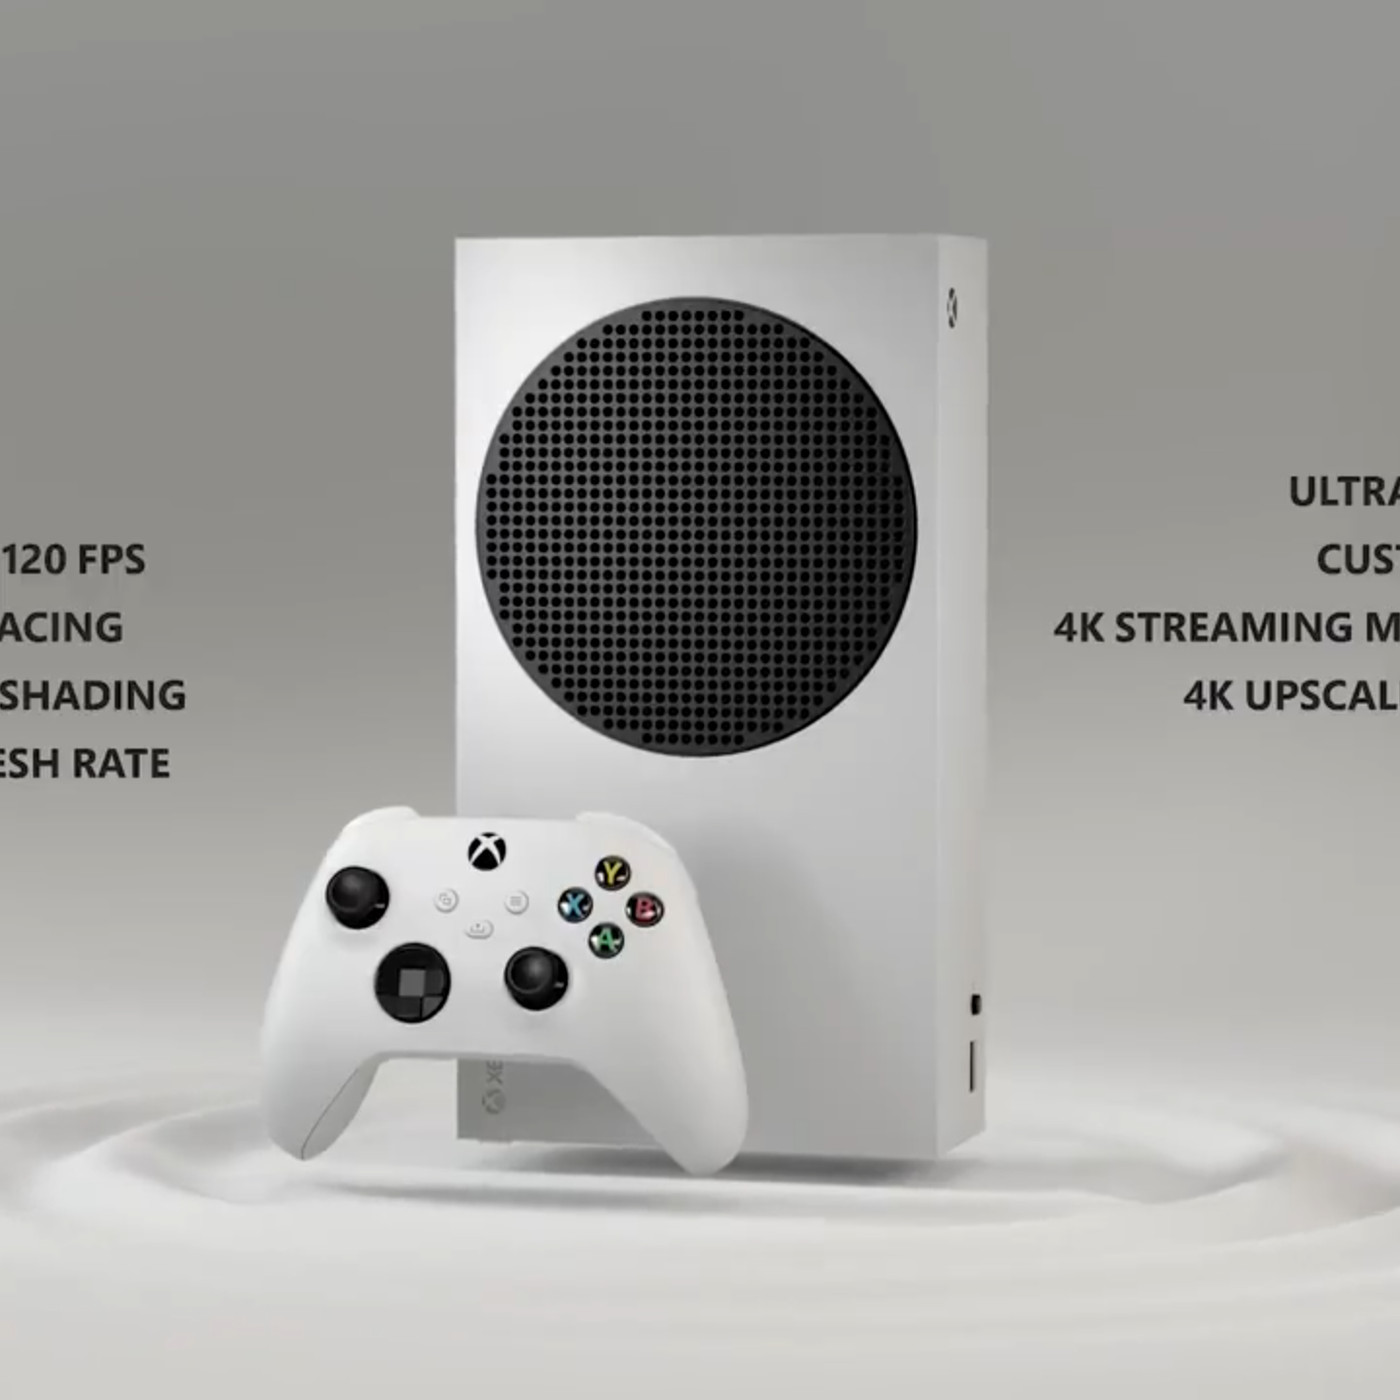 Xbox Series S: $299 price with 512GB of storage, 1440p gaming, and